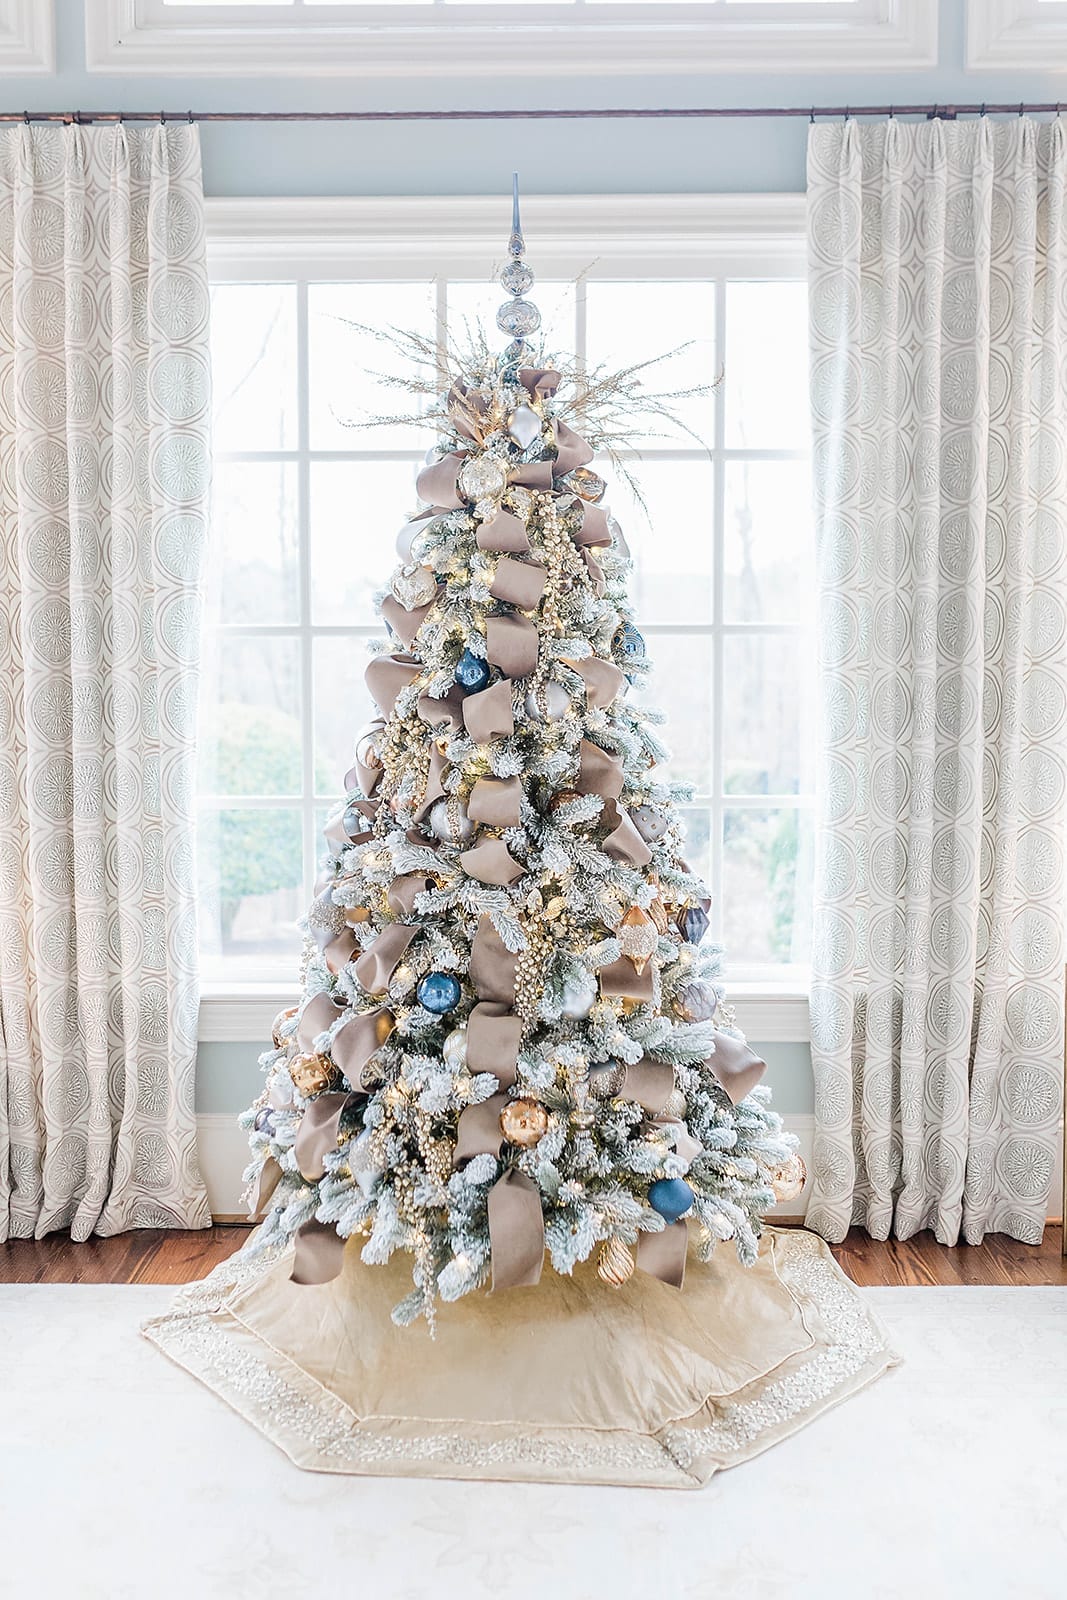 A Taupe velvet ribbon Christmas tree with blue ornaments from Frontgate collection and Frontgate tree topper. A gold Christmas skirt finishes off the taupe and navy blue accented flocked Christmas tree.